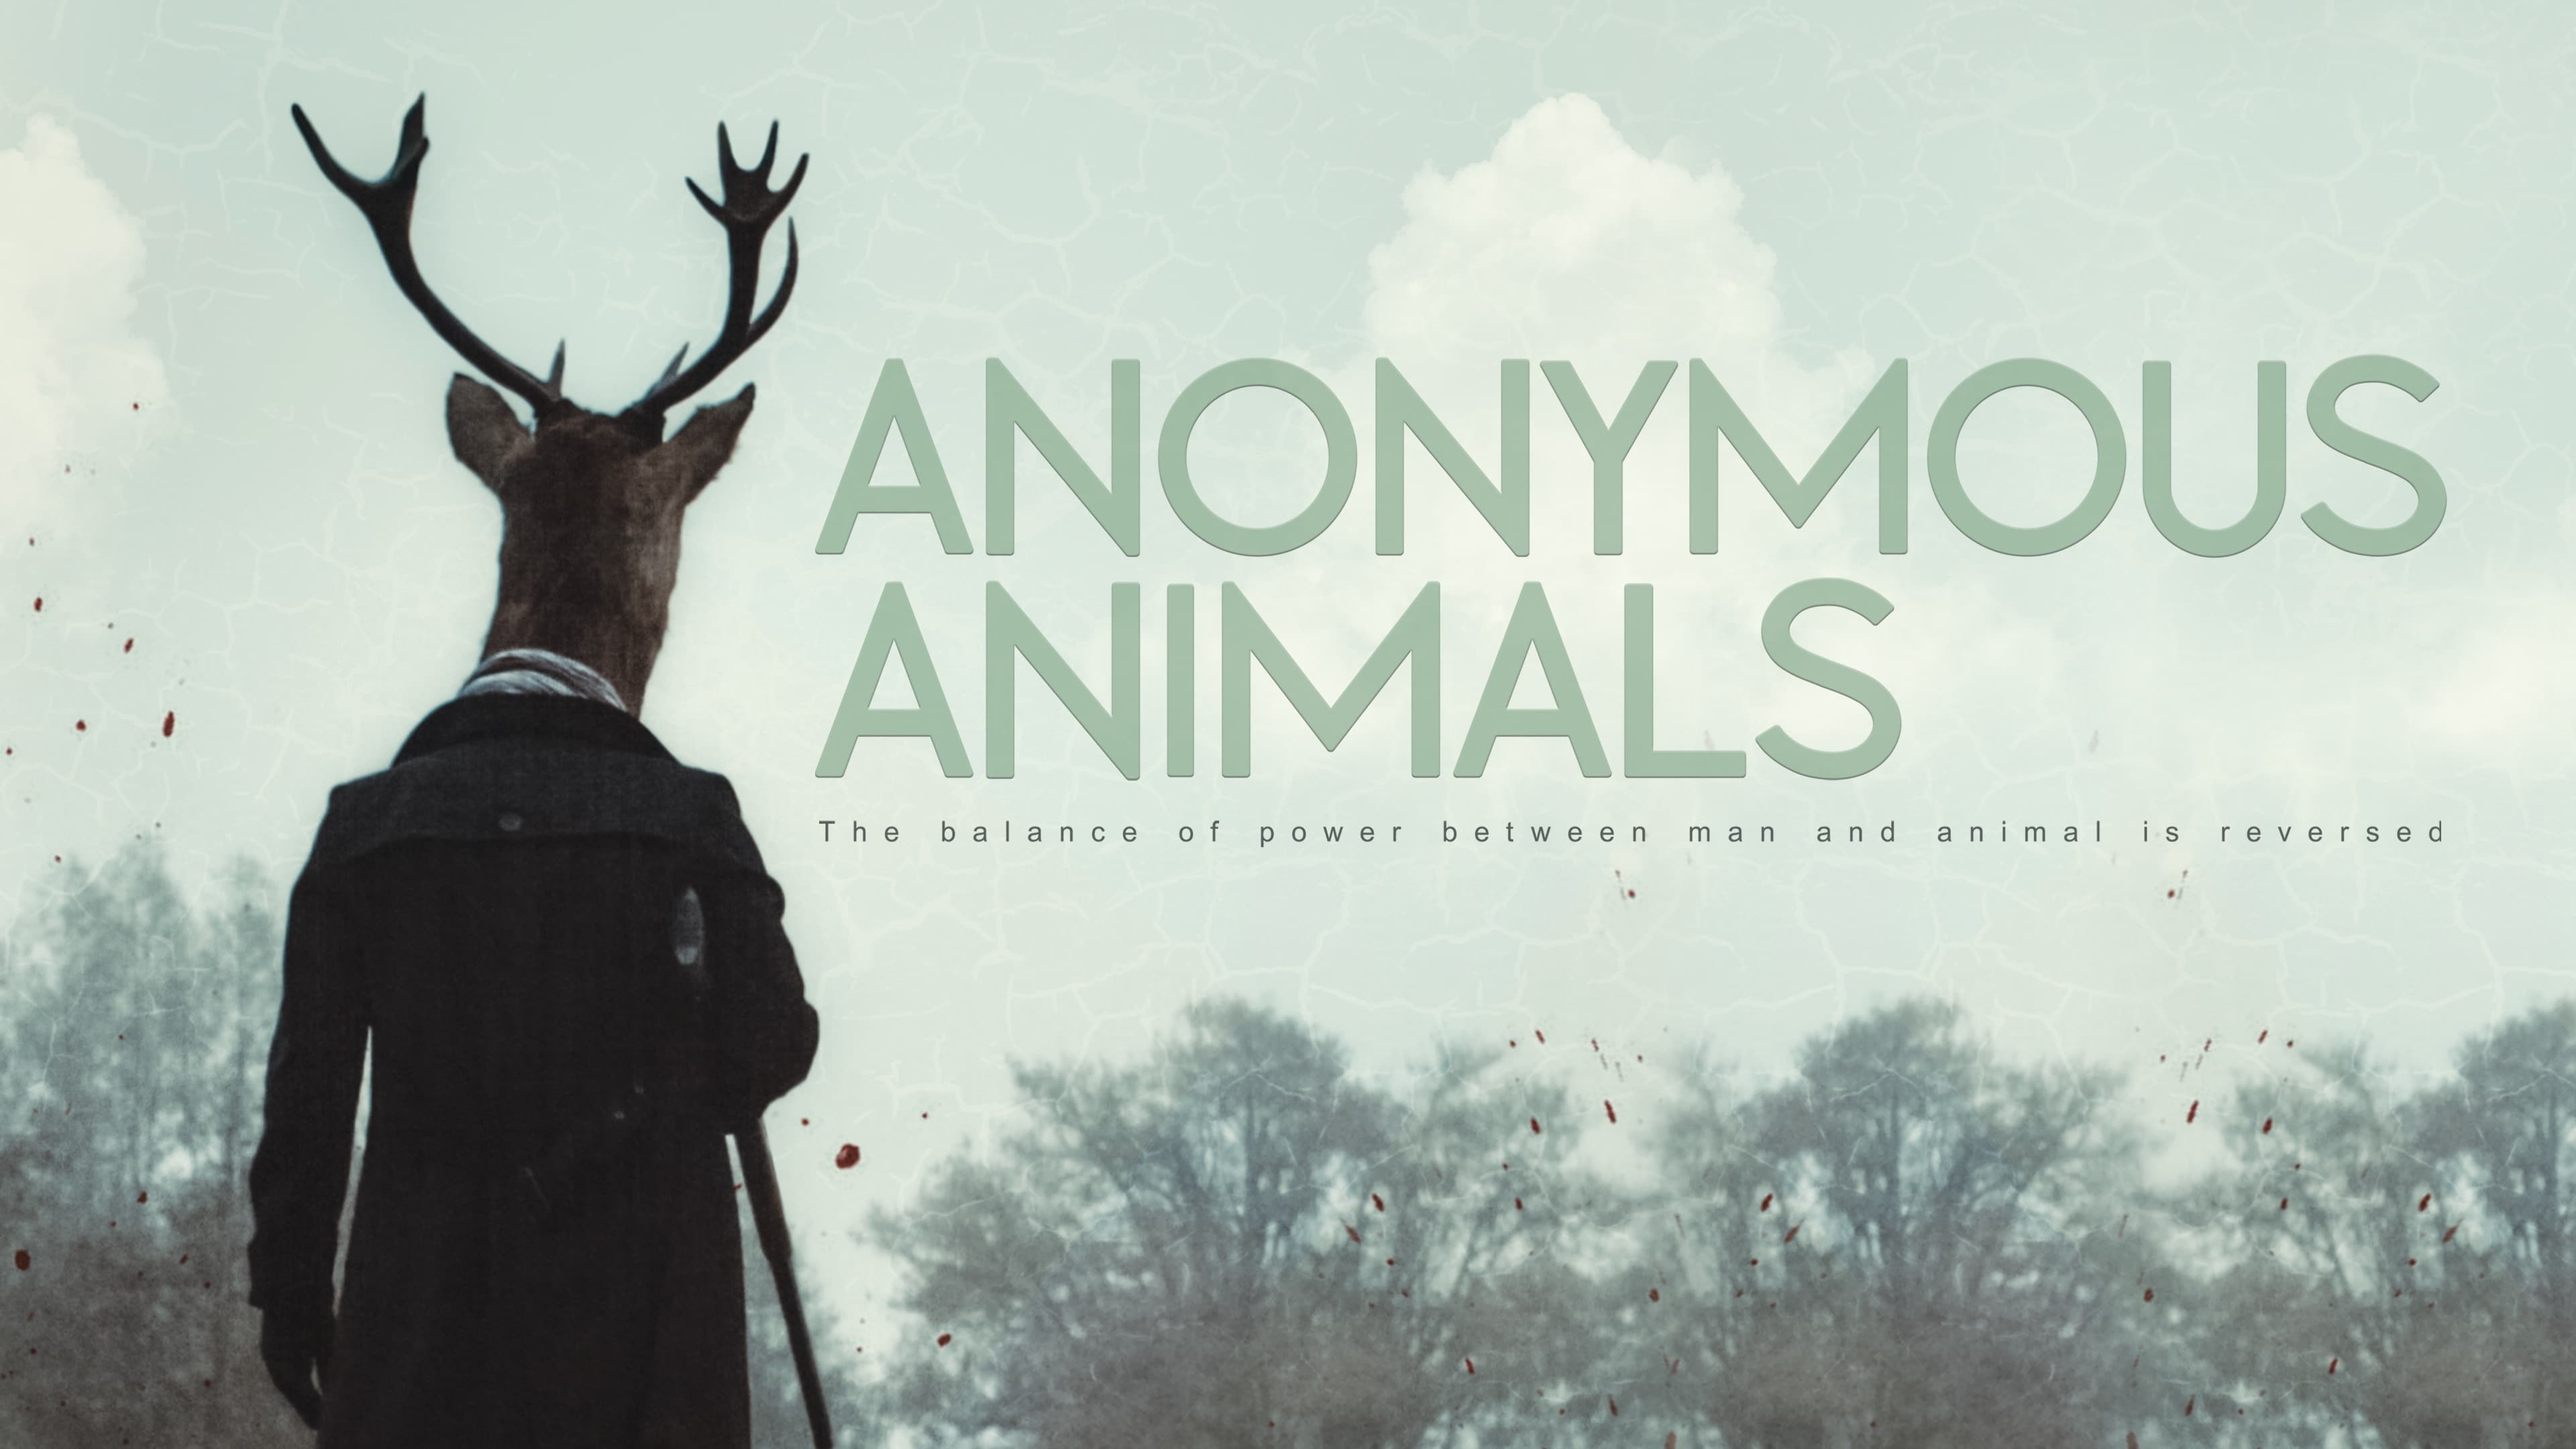 Les animaux anonymes